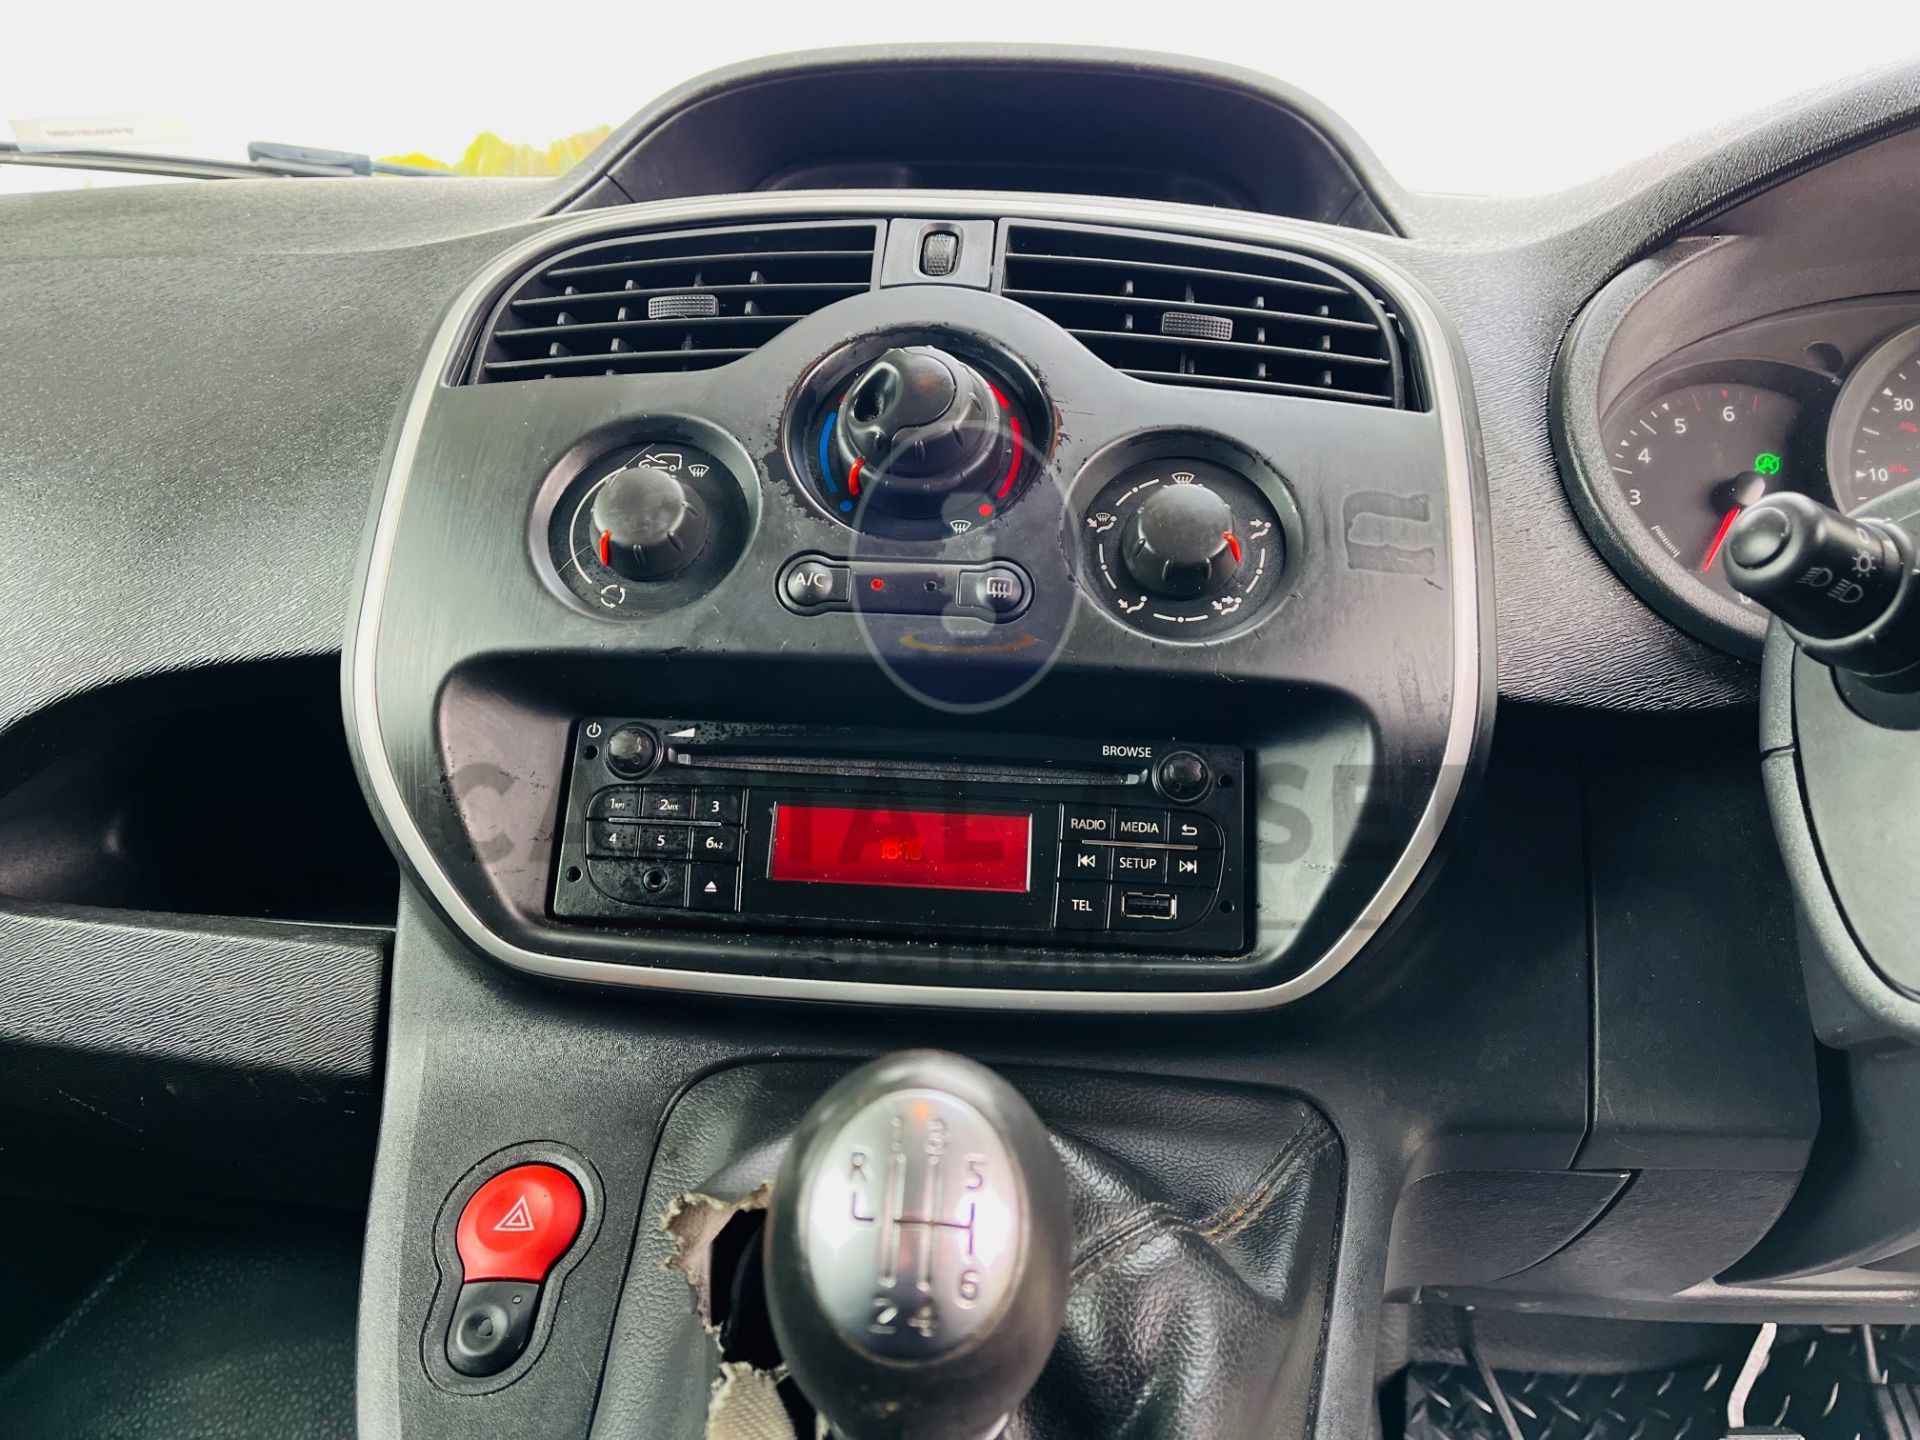 RENAULT KANGOO 1.5DCI "BUSINESS EDITION" (2018) EURO 6 - 6 SPEED - AIR CON - STOP / START -ELEC PACK - Image 17 of 22